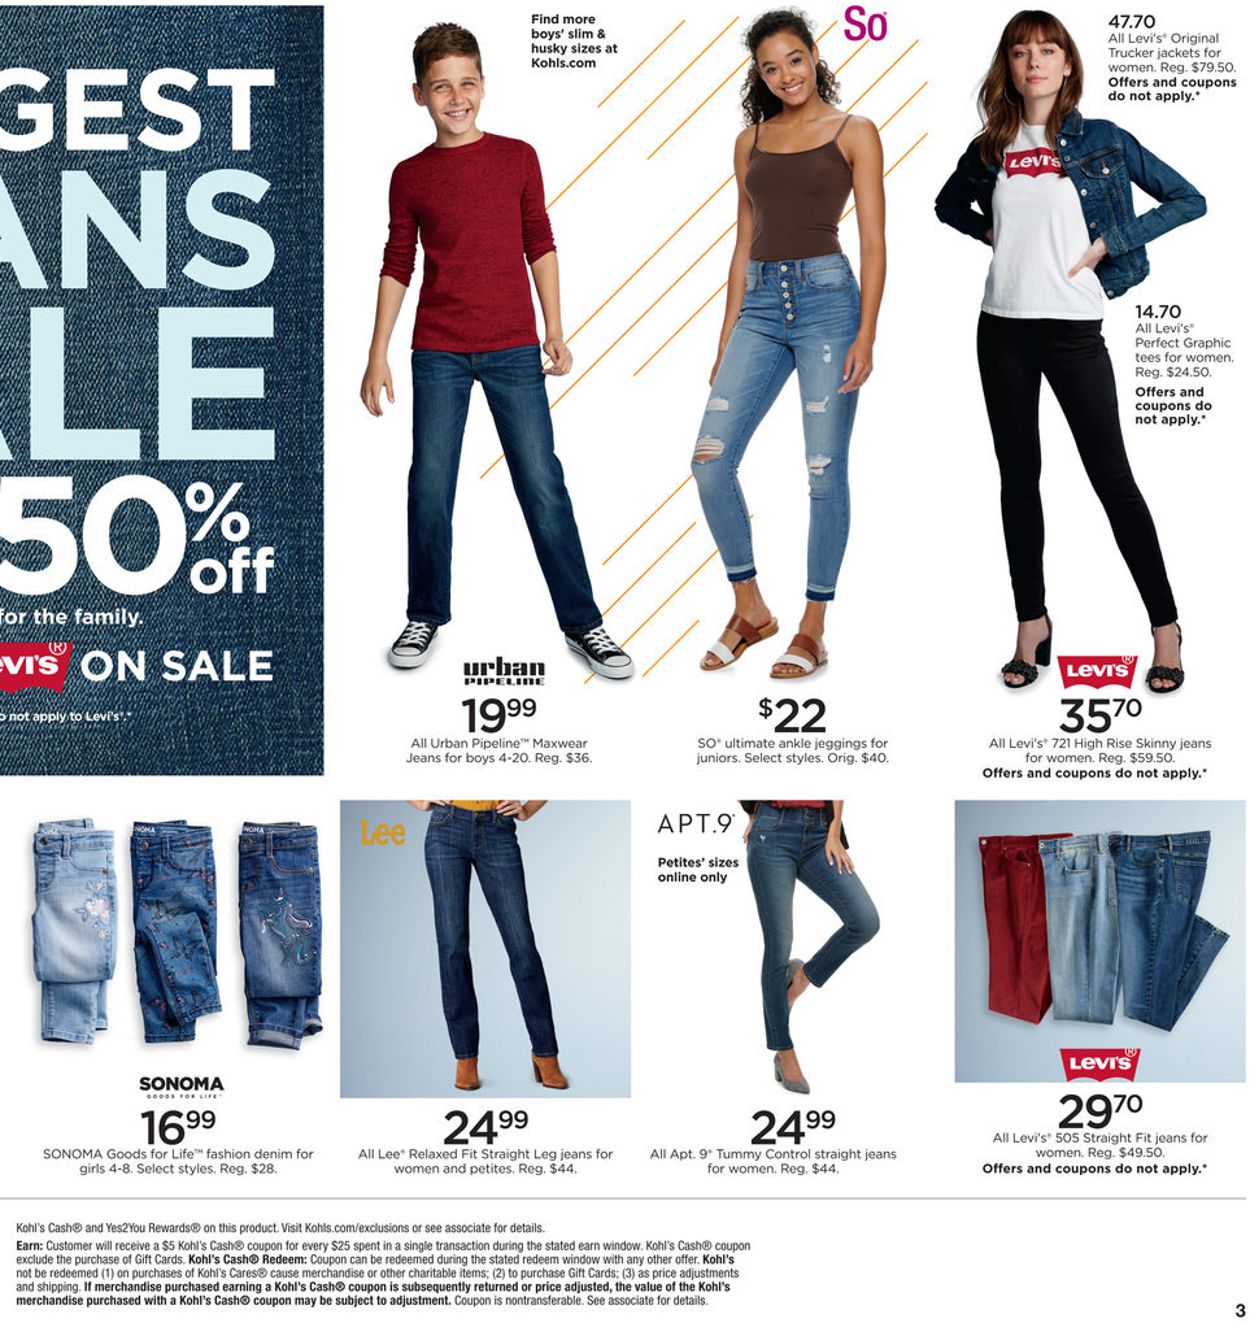 Kohl's Current weekly ad 08/29 - 09/02/2019 [3] - frequent-ads.com